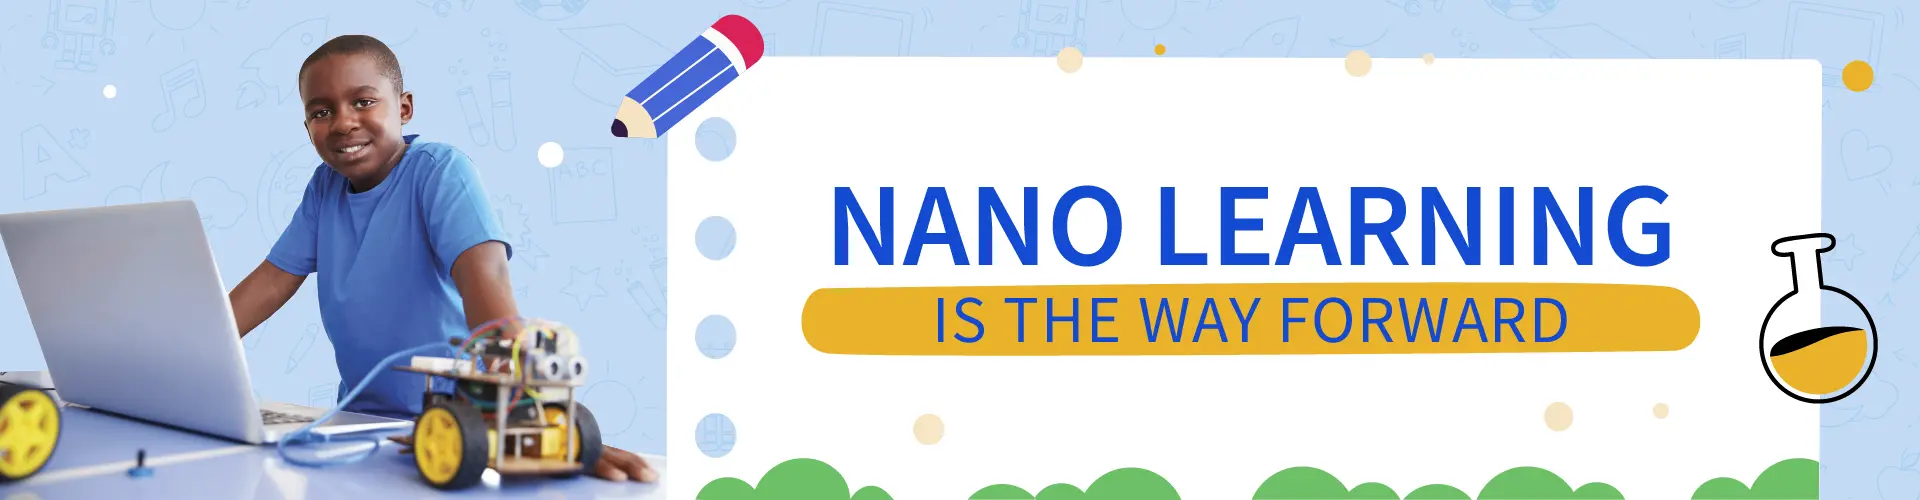 nano learning is the way forward